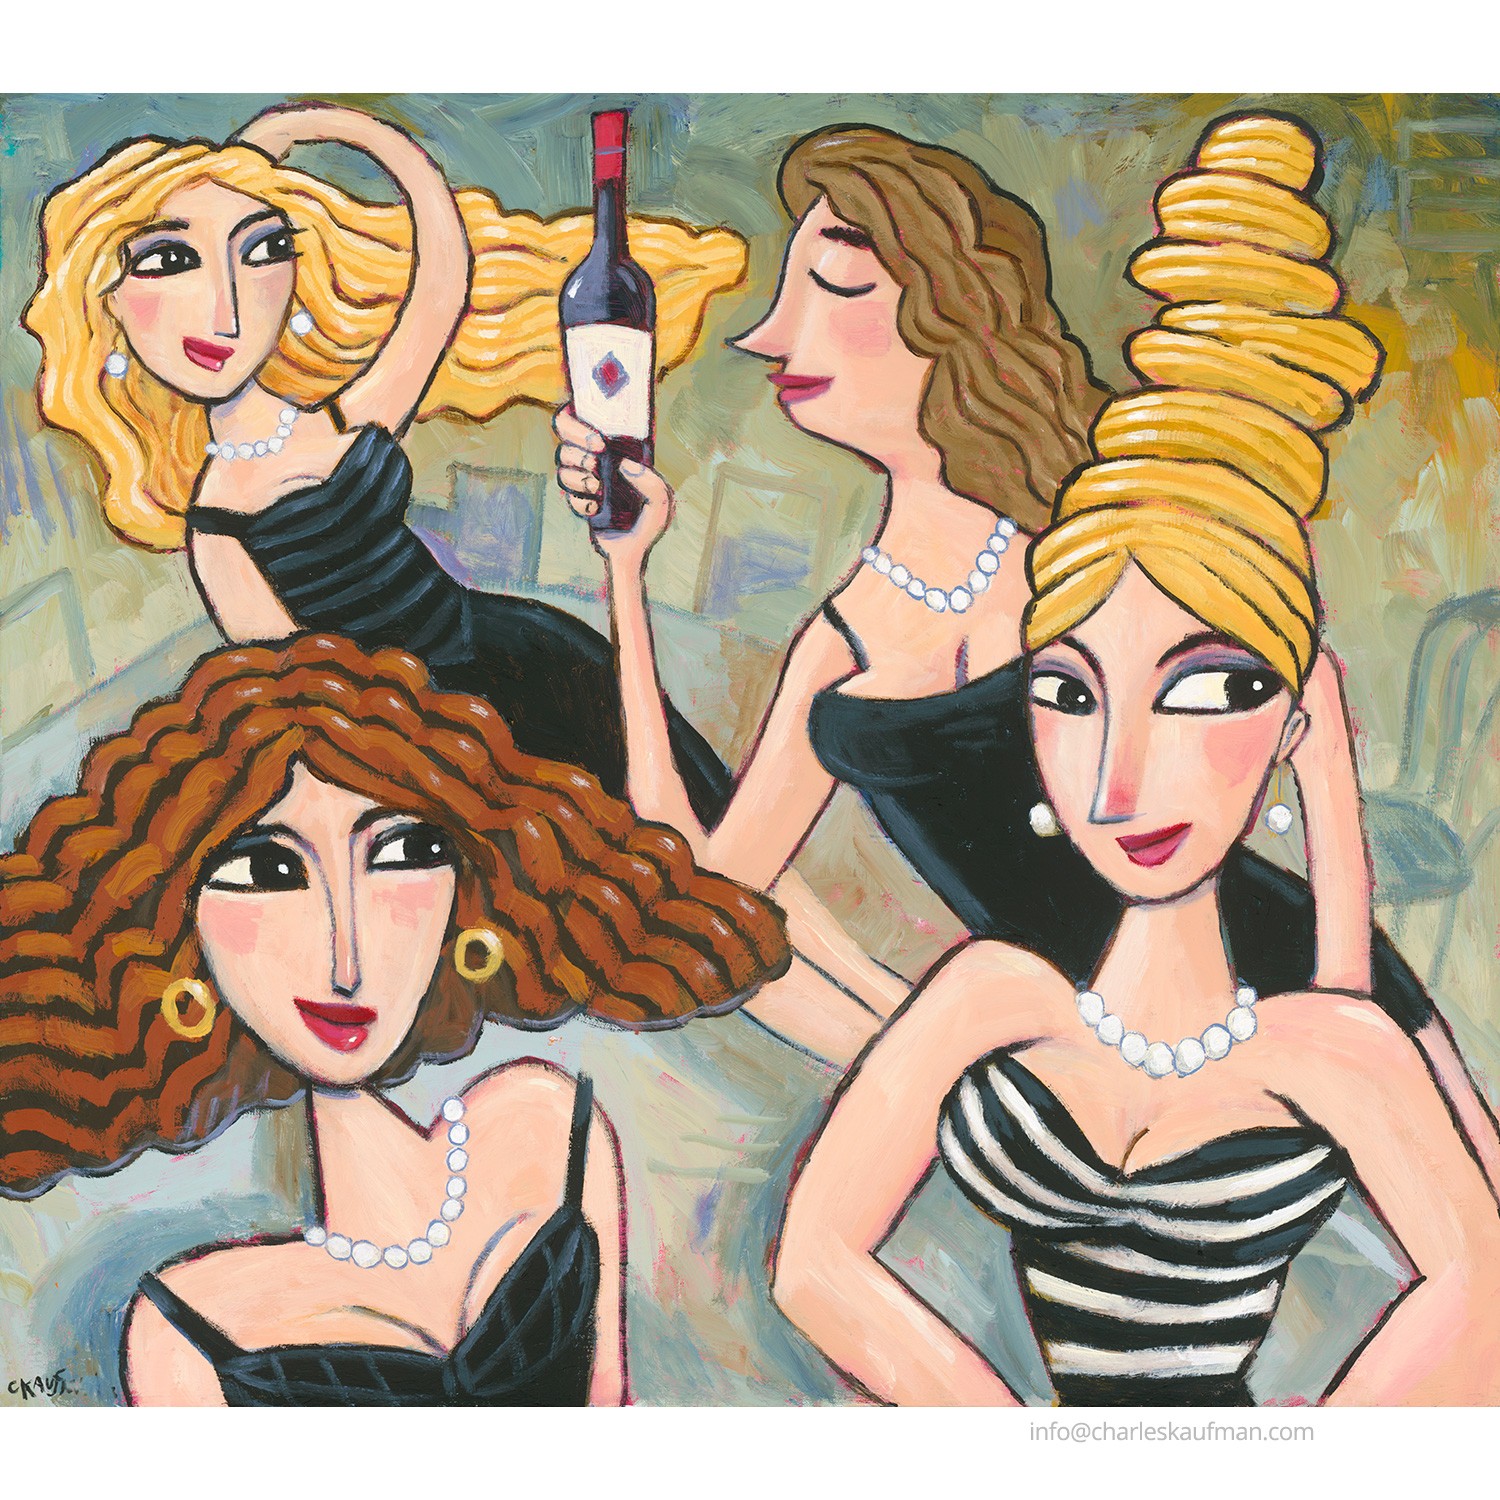 Painting: “Four Friends and a Bottle of Wine” - Charles Kaufman Art Shop